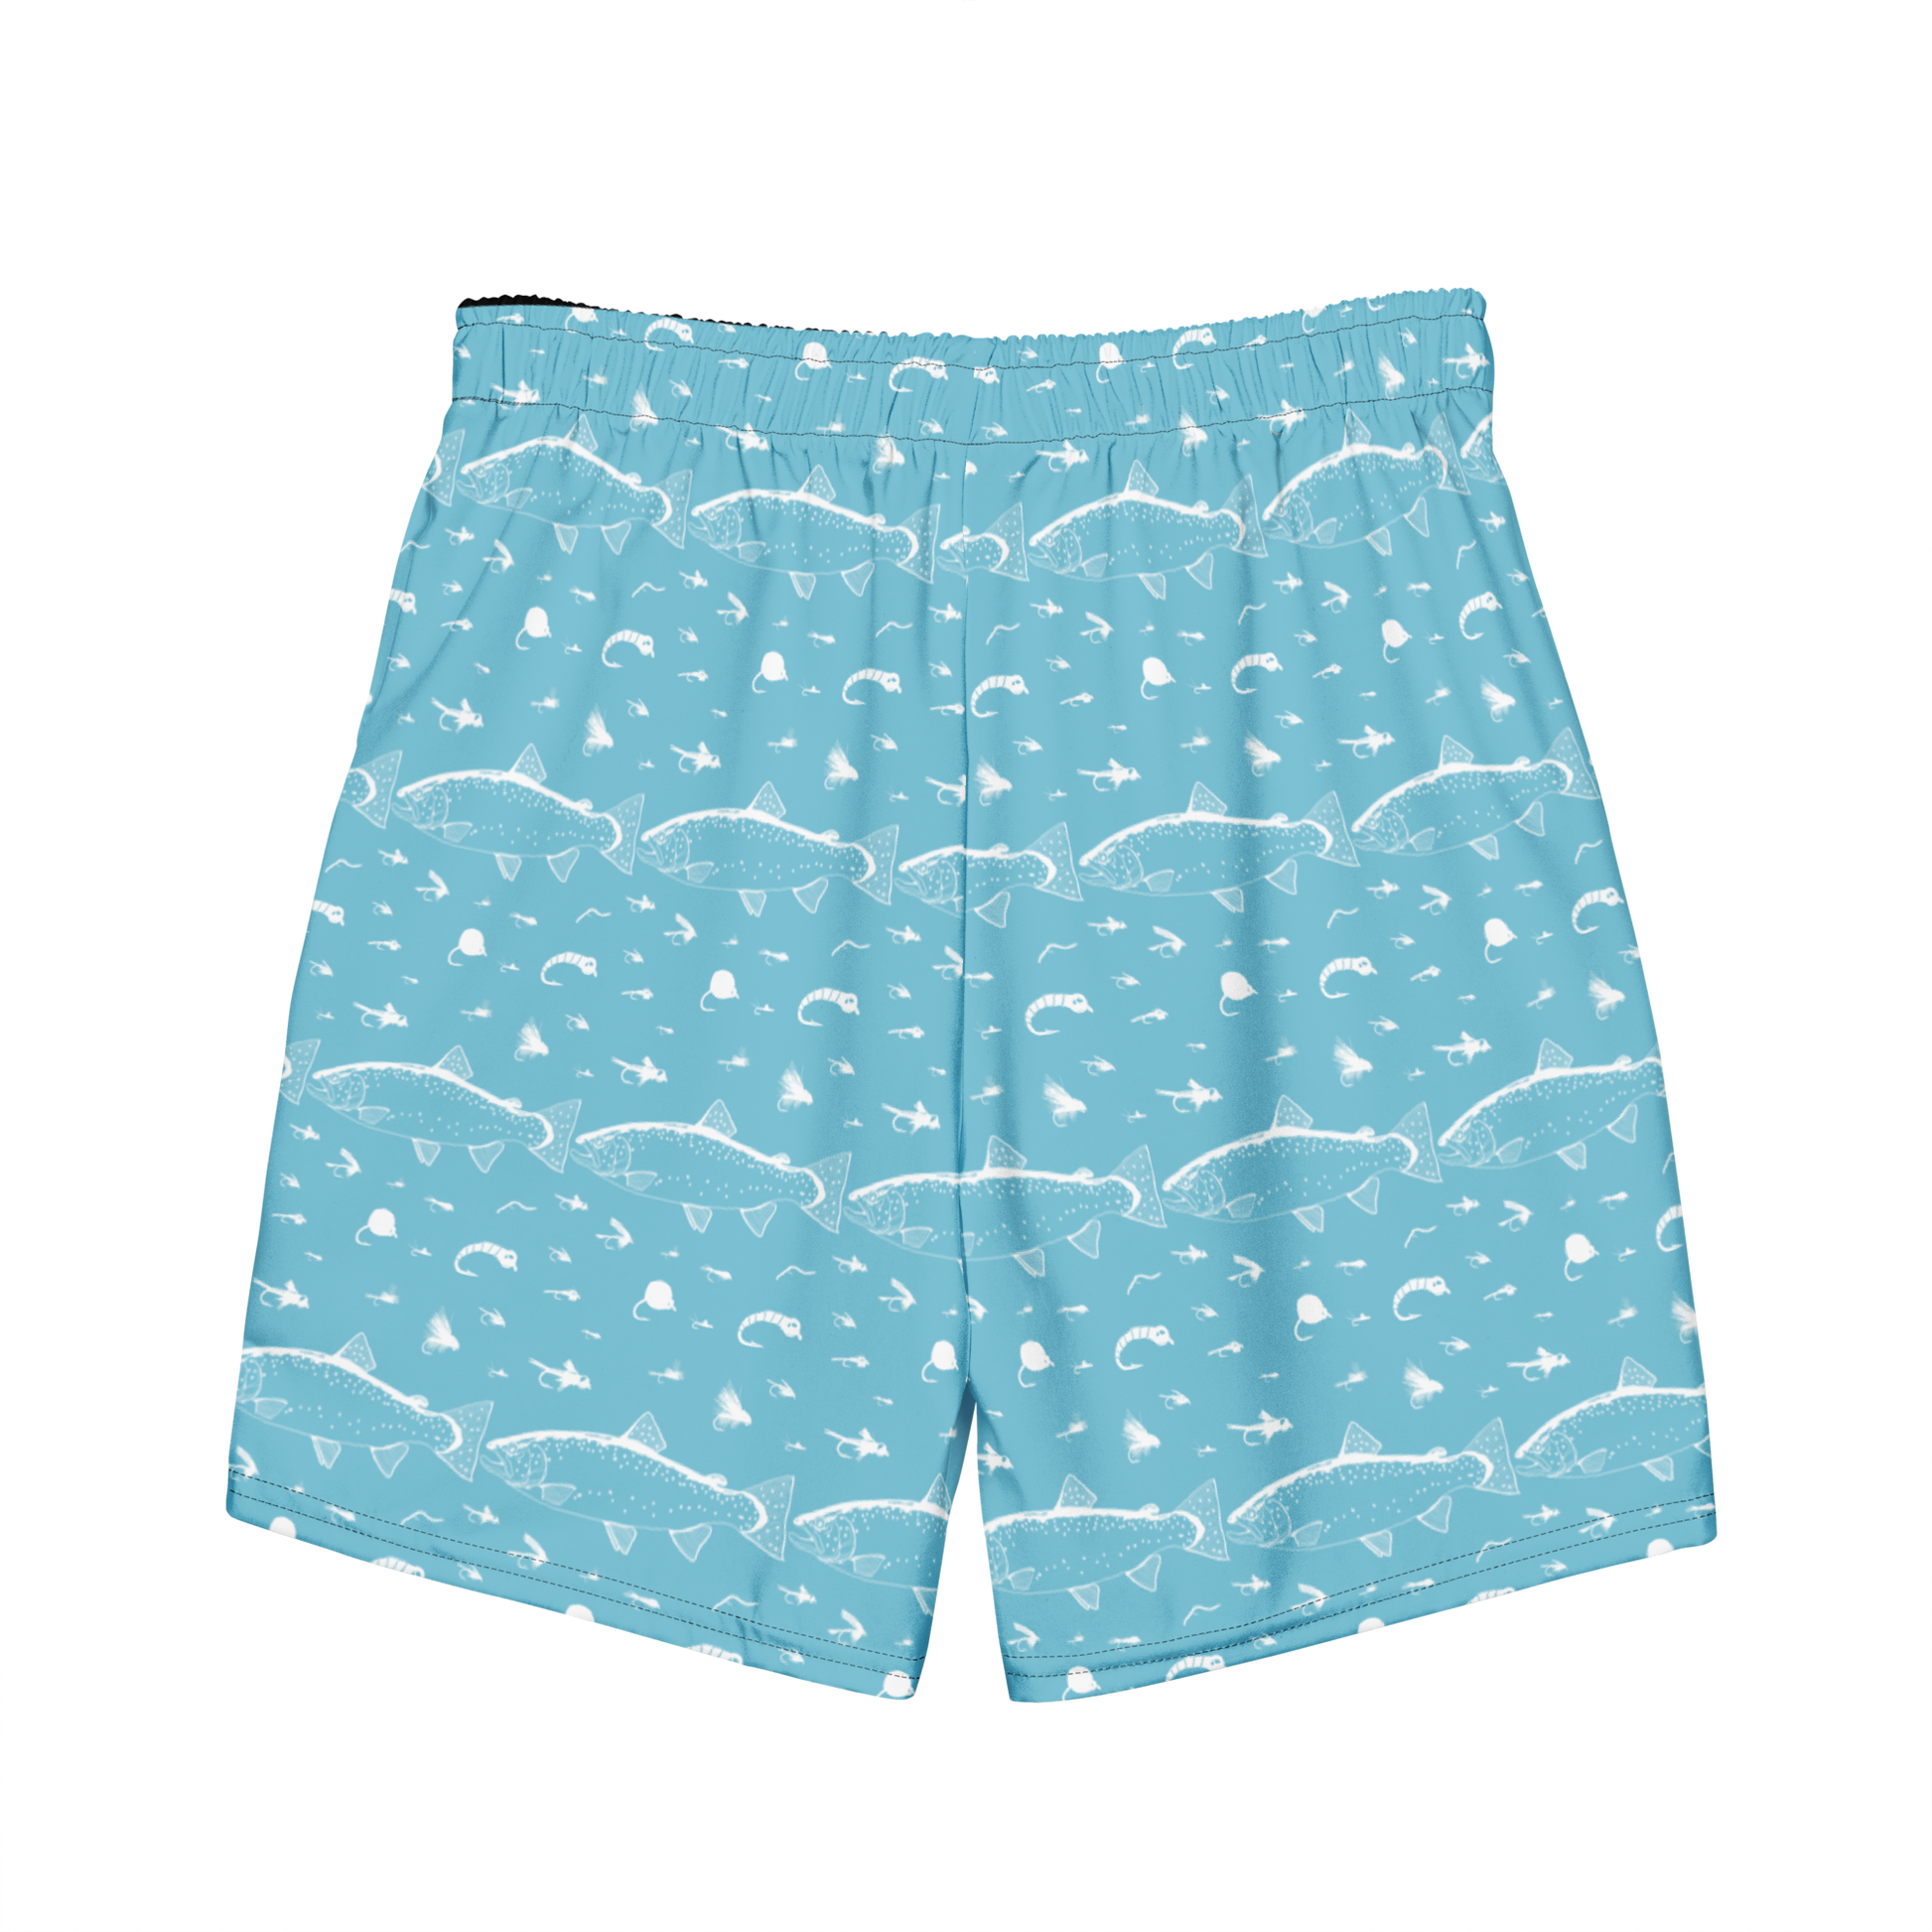 Blue fly fishing shorts / swim trunks. They have a pattern with trout and flies. Back side of fishing shorts 